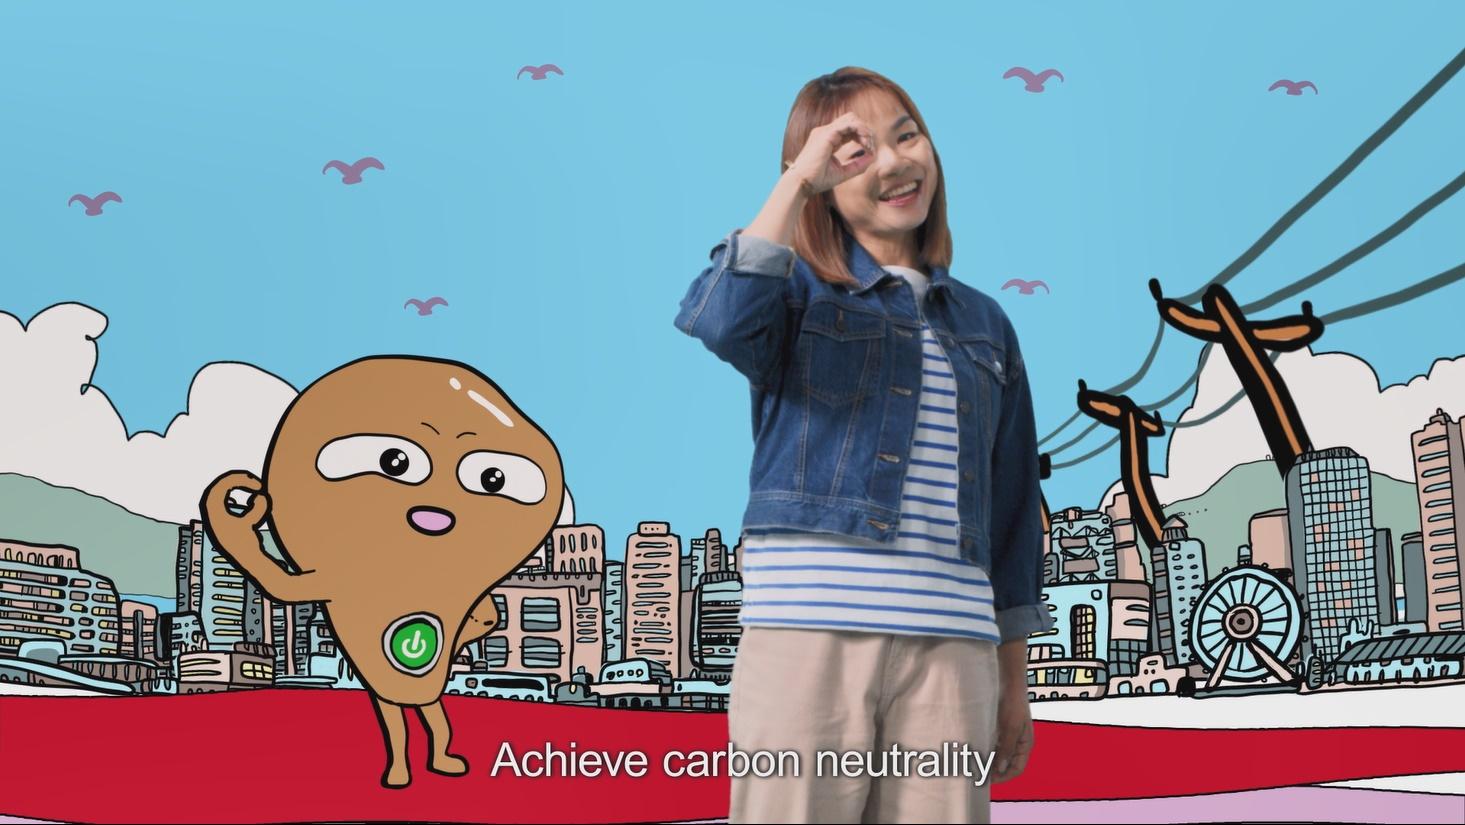 The Environment Bureau today (June 5) launched a music video and Announcements in the Public Interest, featuring "Carbon Neutrality" Ambassador Lee Wai-sze, to appeal to all sectors of the community to participate in climate action.